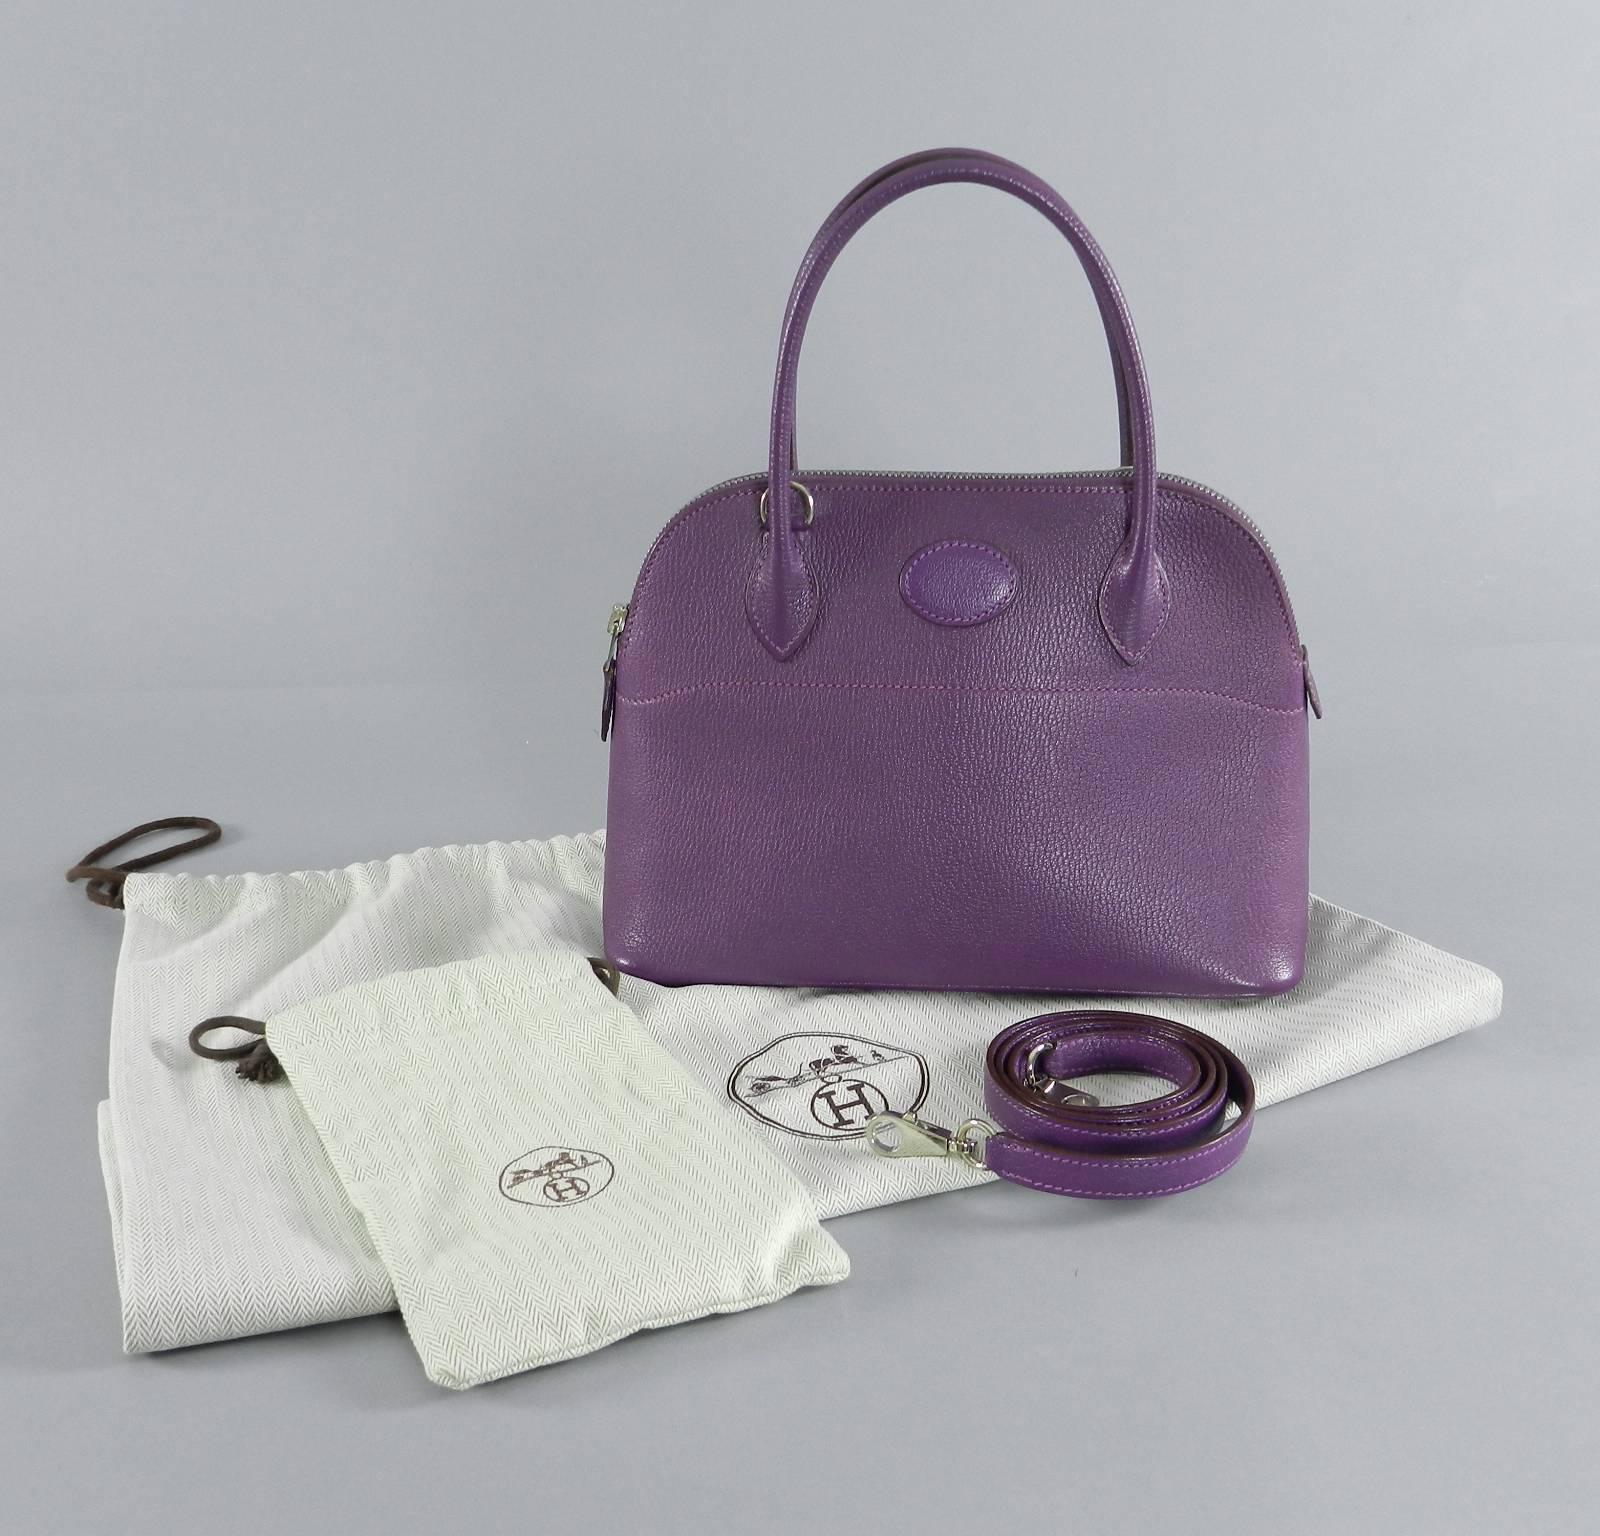 Hermes violet bolide 27 cm. Comes with strap (unused with plastic on it), strap duster, and main duster. Excellent preowned condition with a tiny scuff on one corner and some wear to metal of zipper pull.  Date stamp K in square for year 2007.